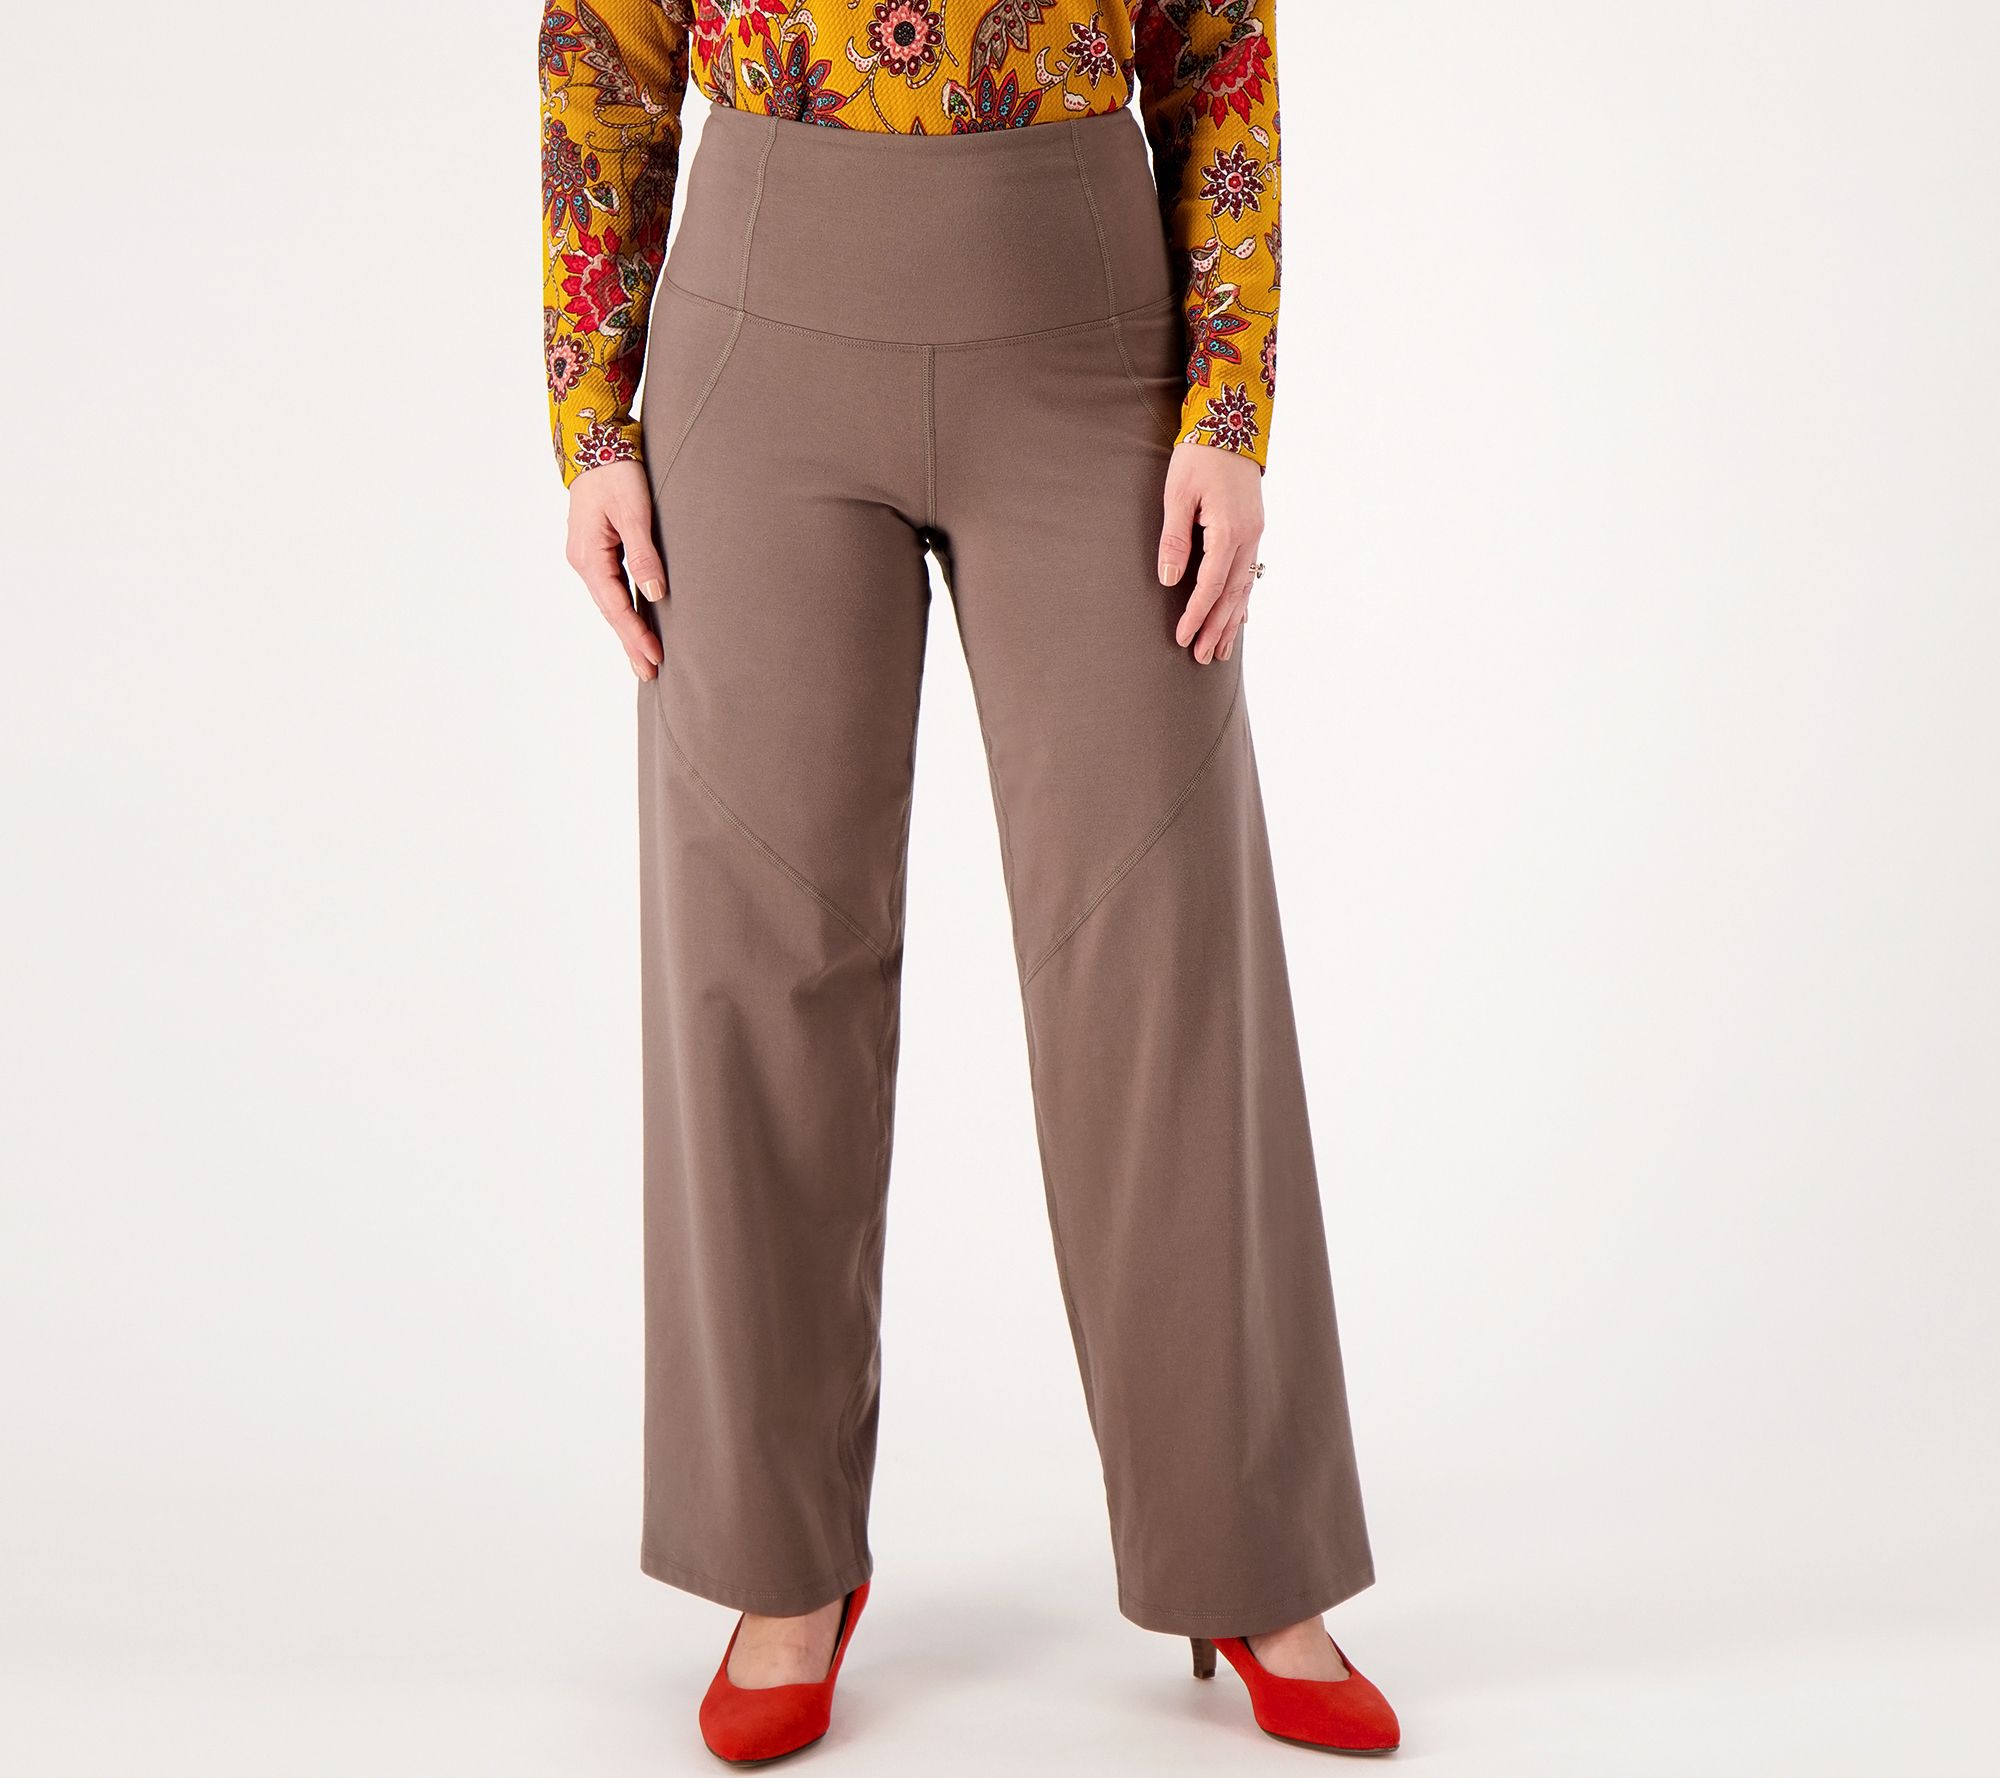 Women with Control, Pants & Jumpsuits, Women With Control Slim Leg Pants  Tummy Control A225789